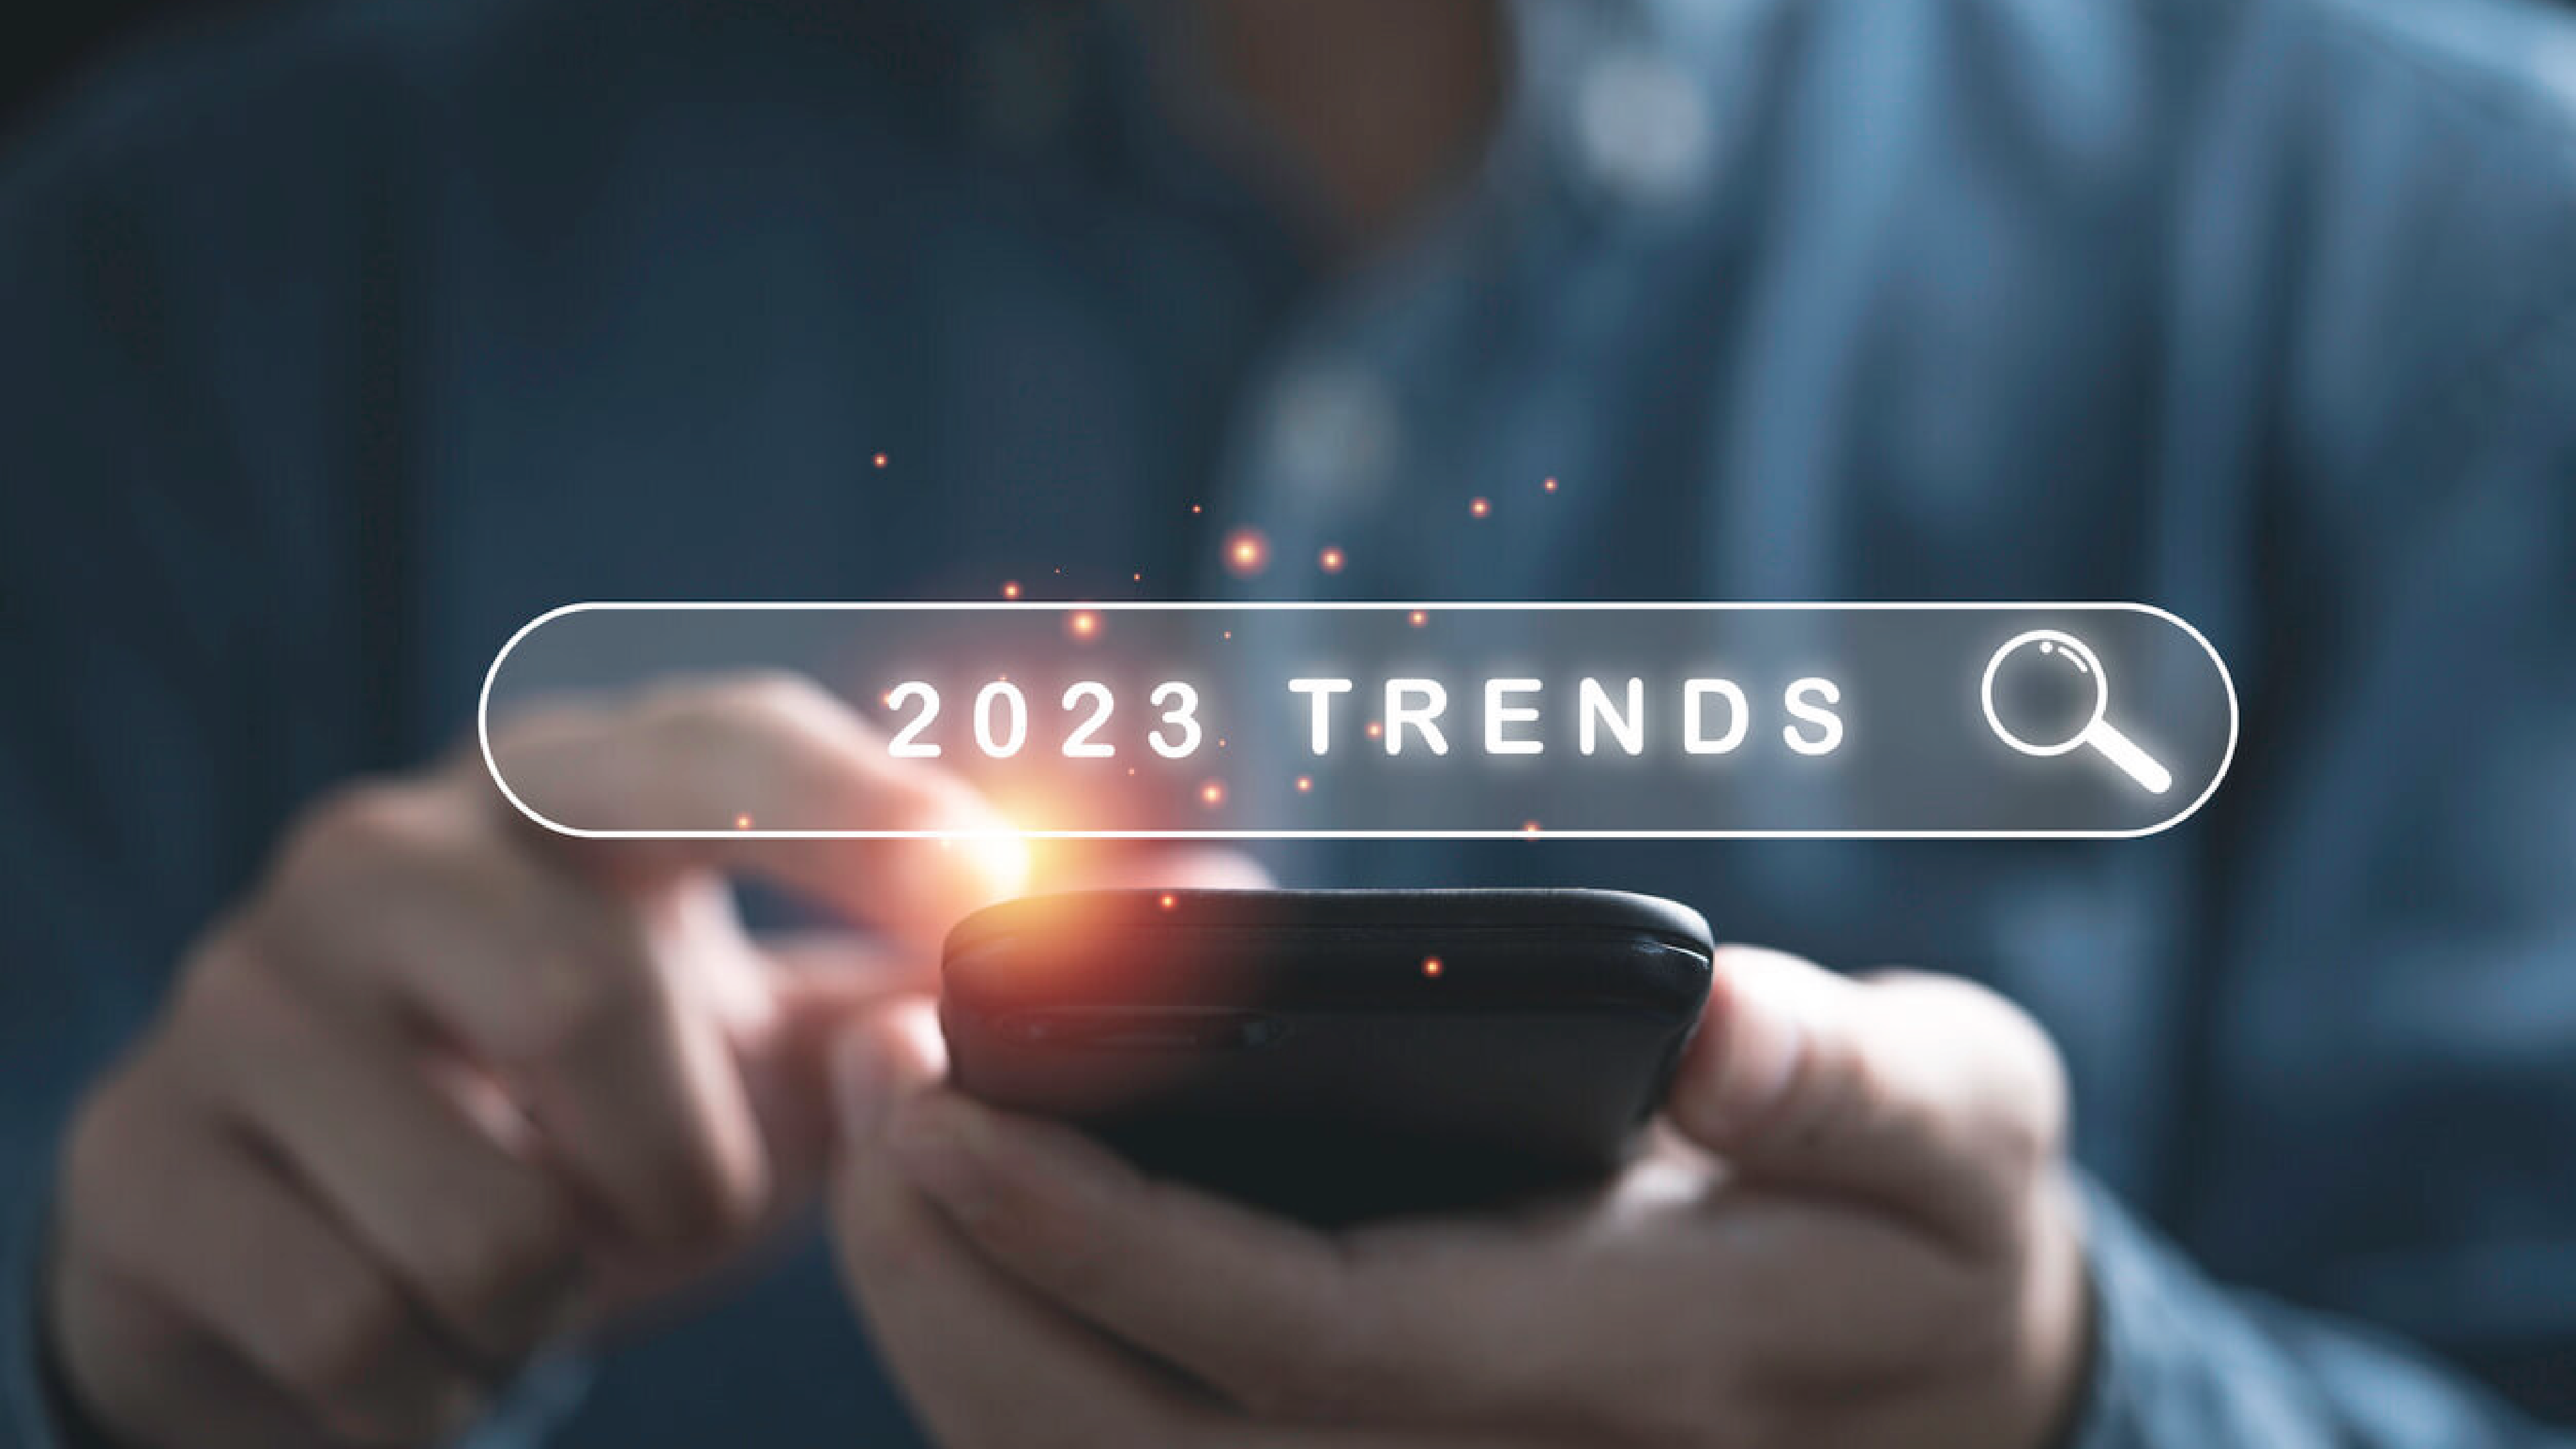 Person holding phone, with title "2023 trends" displayed.